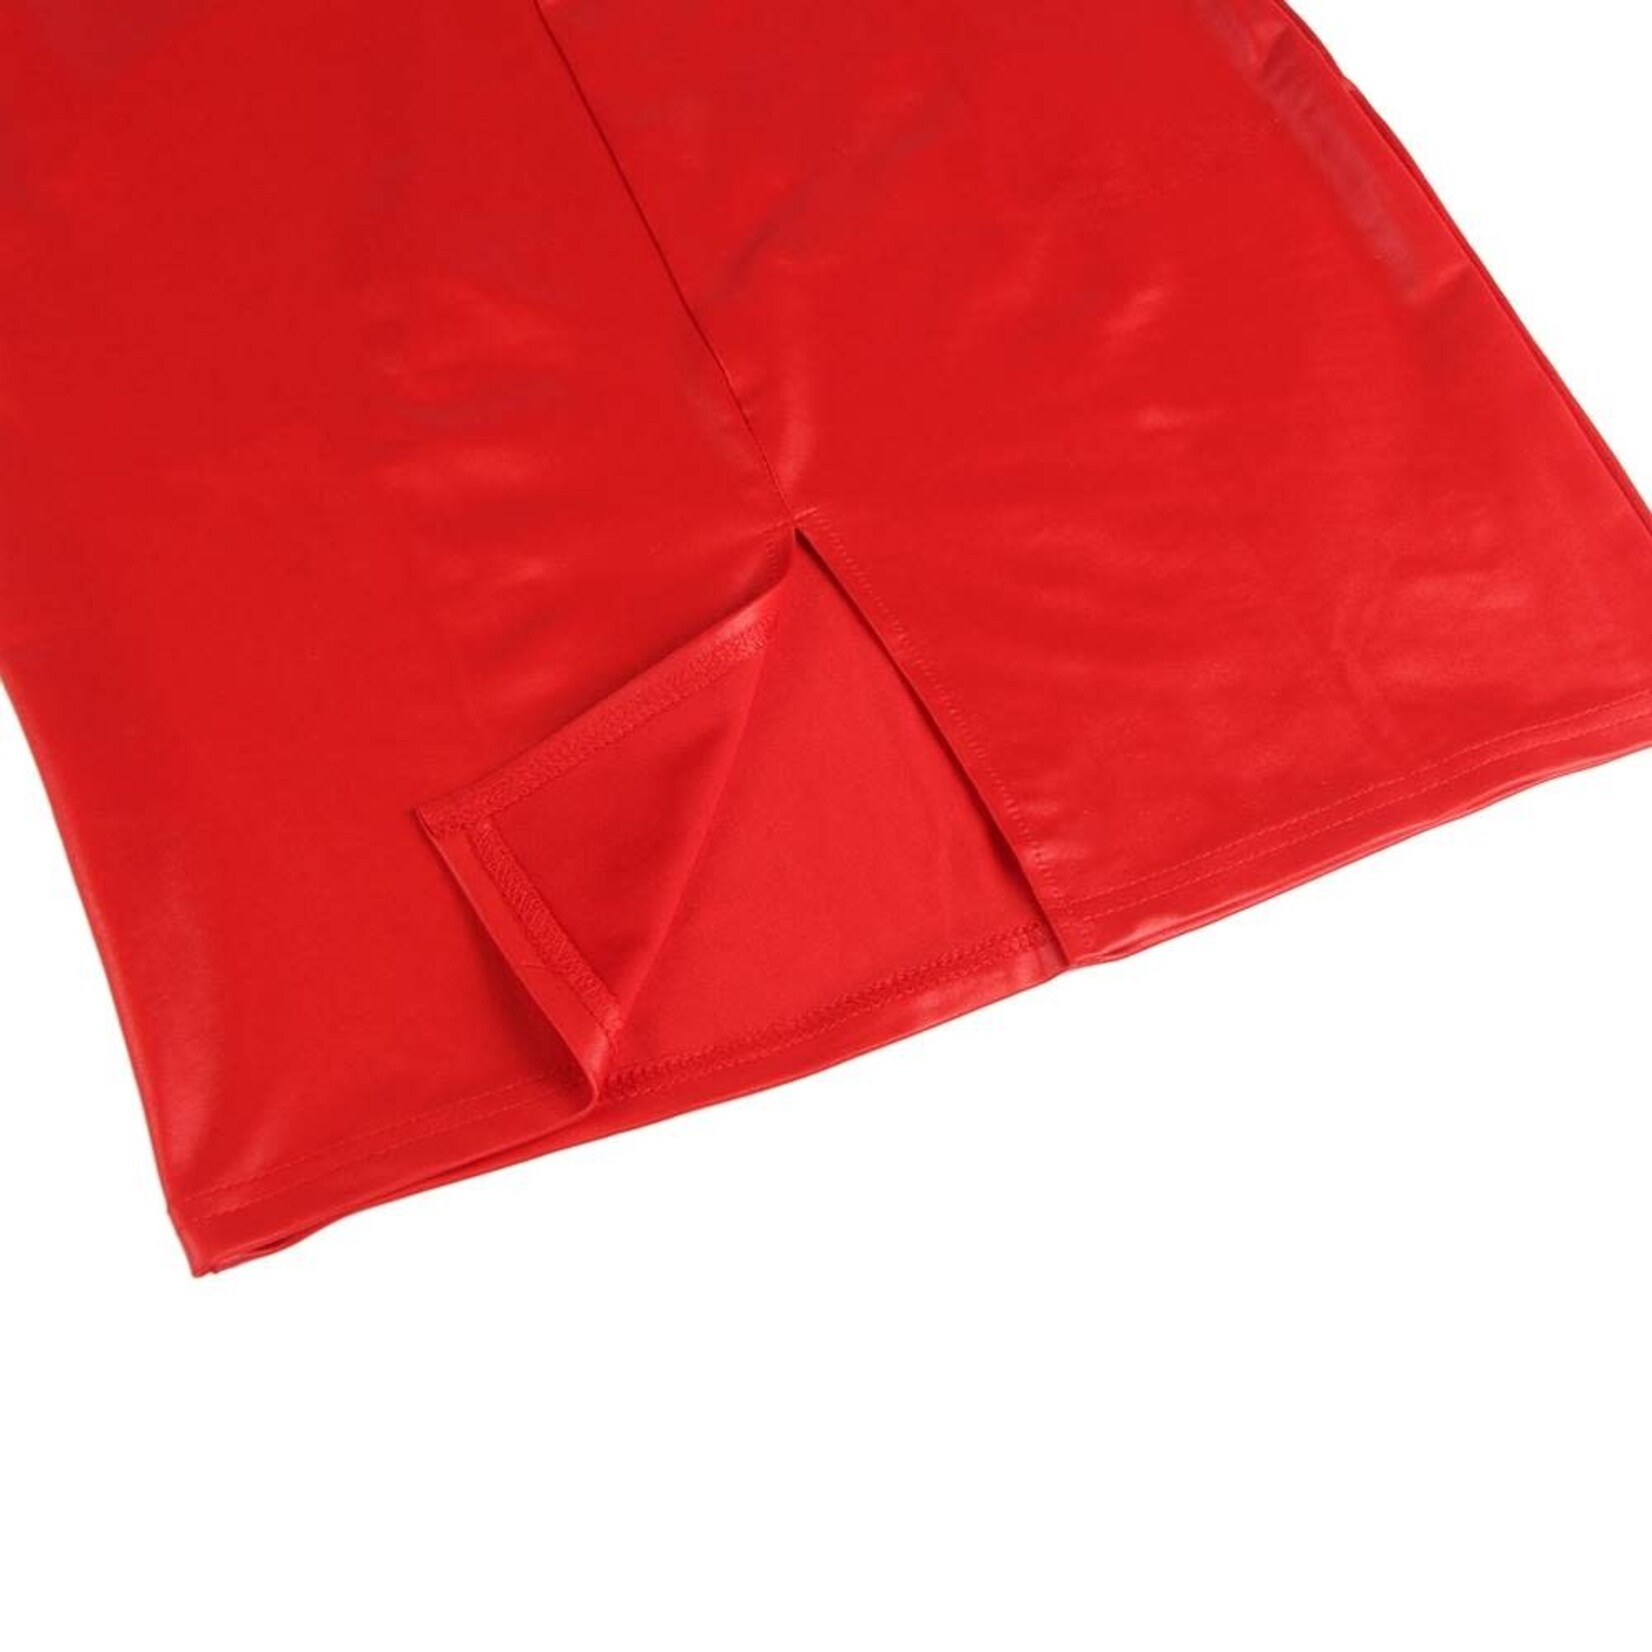 OH YEAH! -  SEXY BAG HIP TIGHT NIGHTCLUB PLUS SIZE RED LEATHER SKIRT XL-2XL